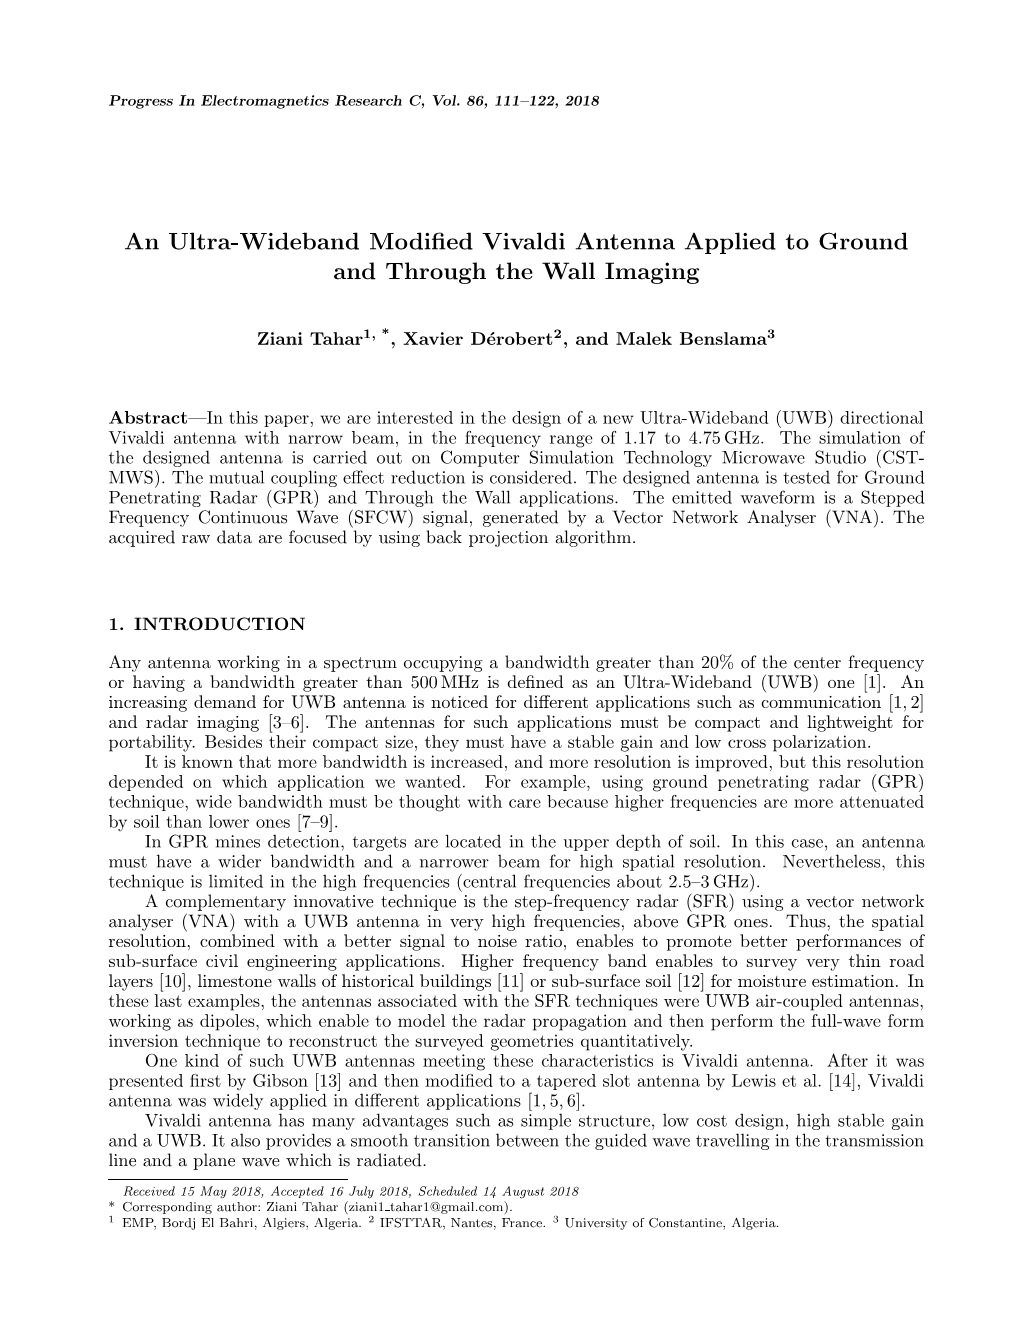 An Ultra-Wideband Modified Vivaldi Antenna Applied to Ground And